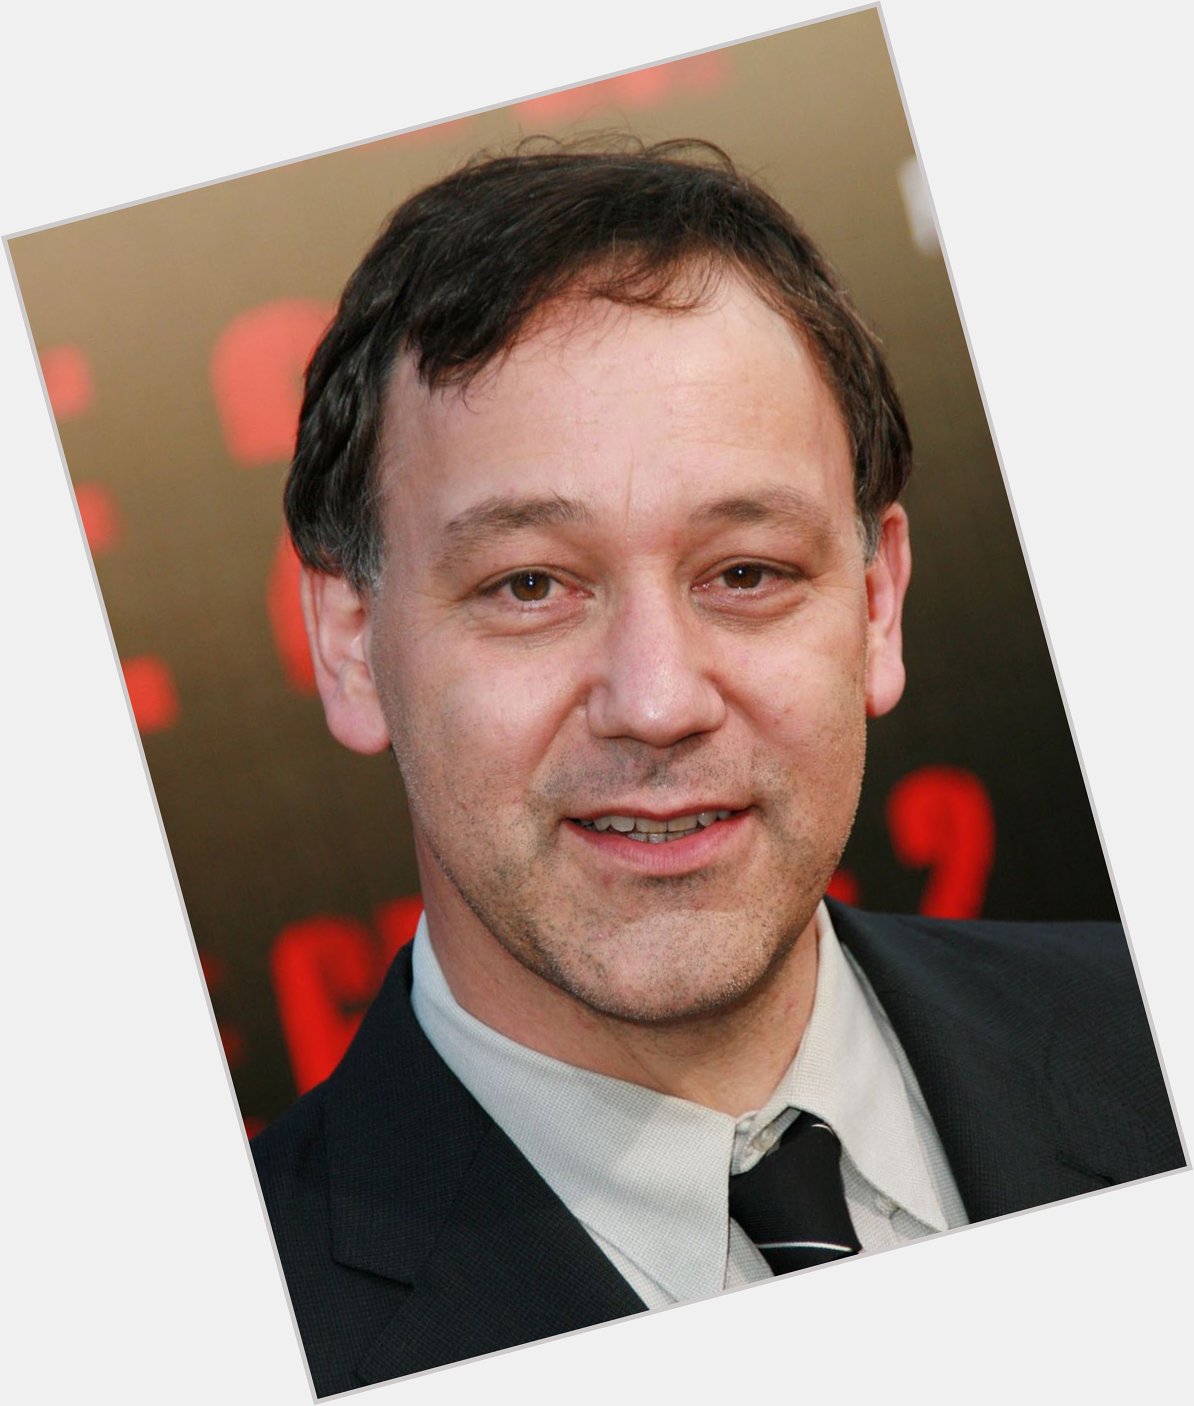 Man time sure does fly, anyhow Happy Birthday to the man himself, Sam Raimi 